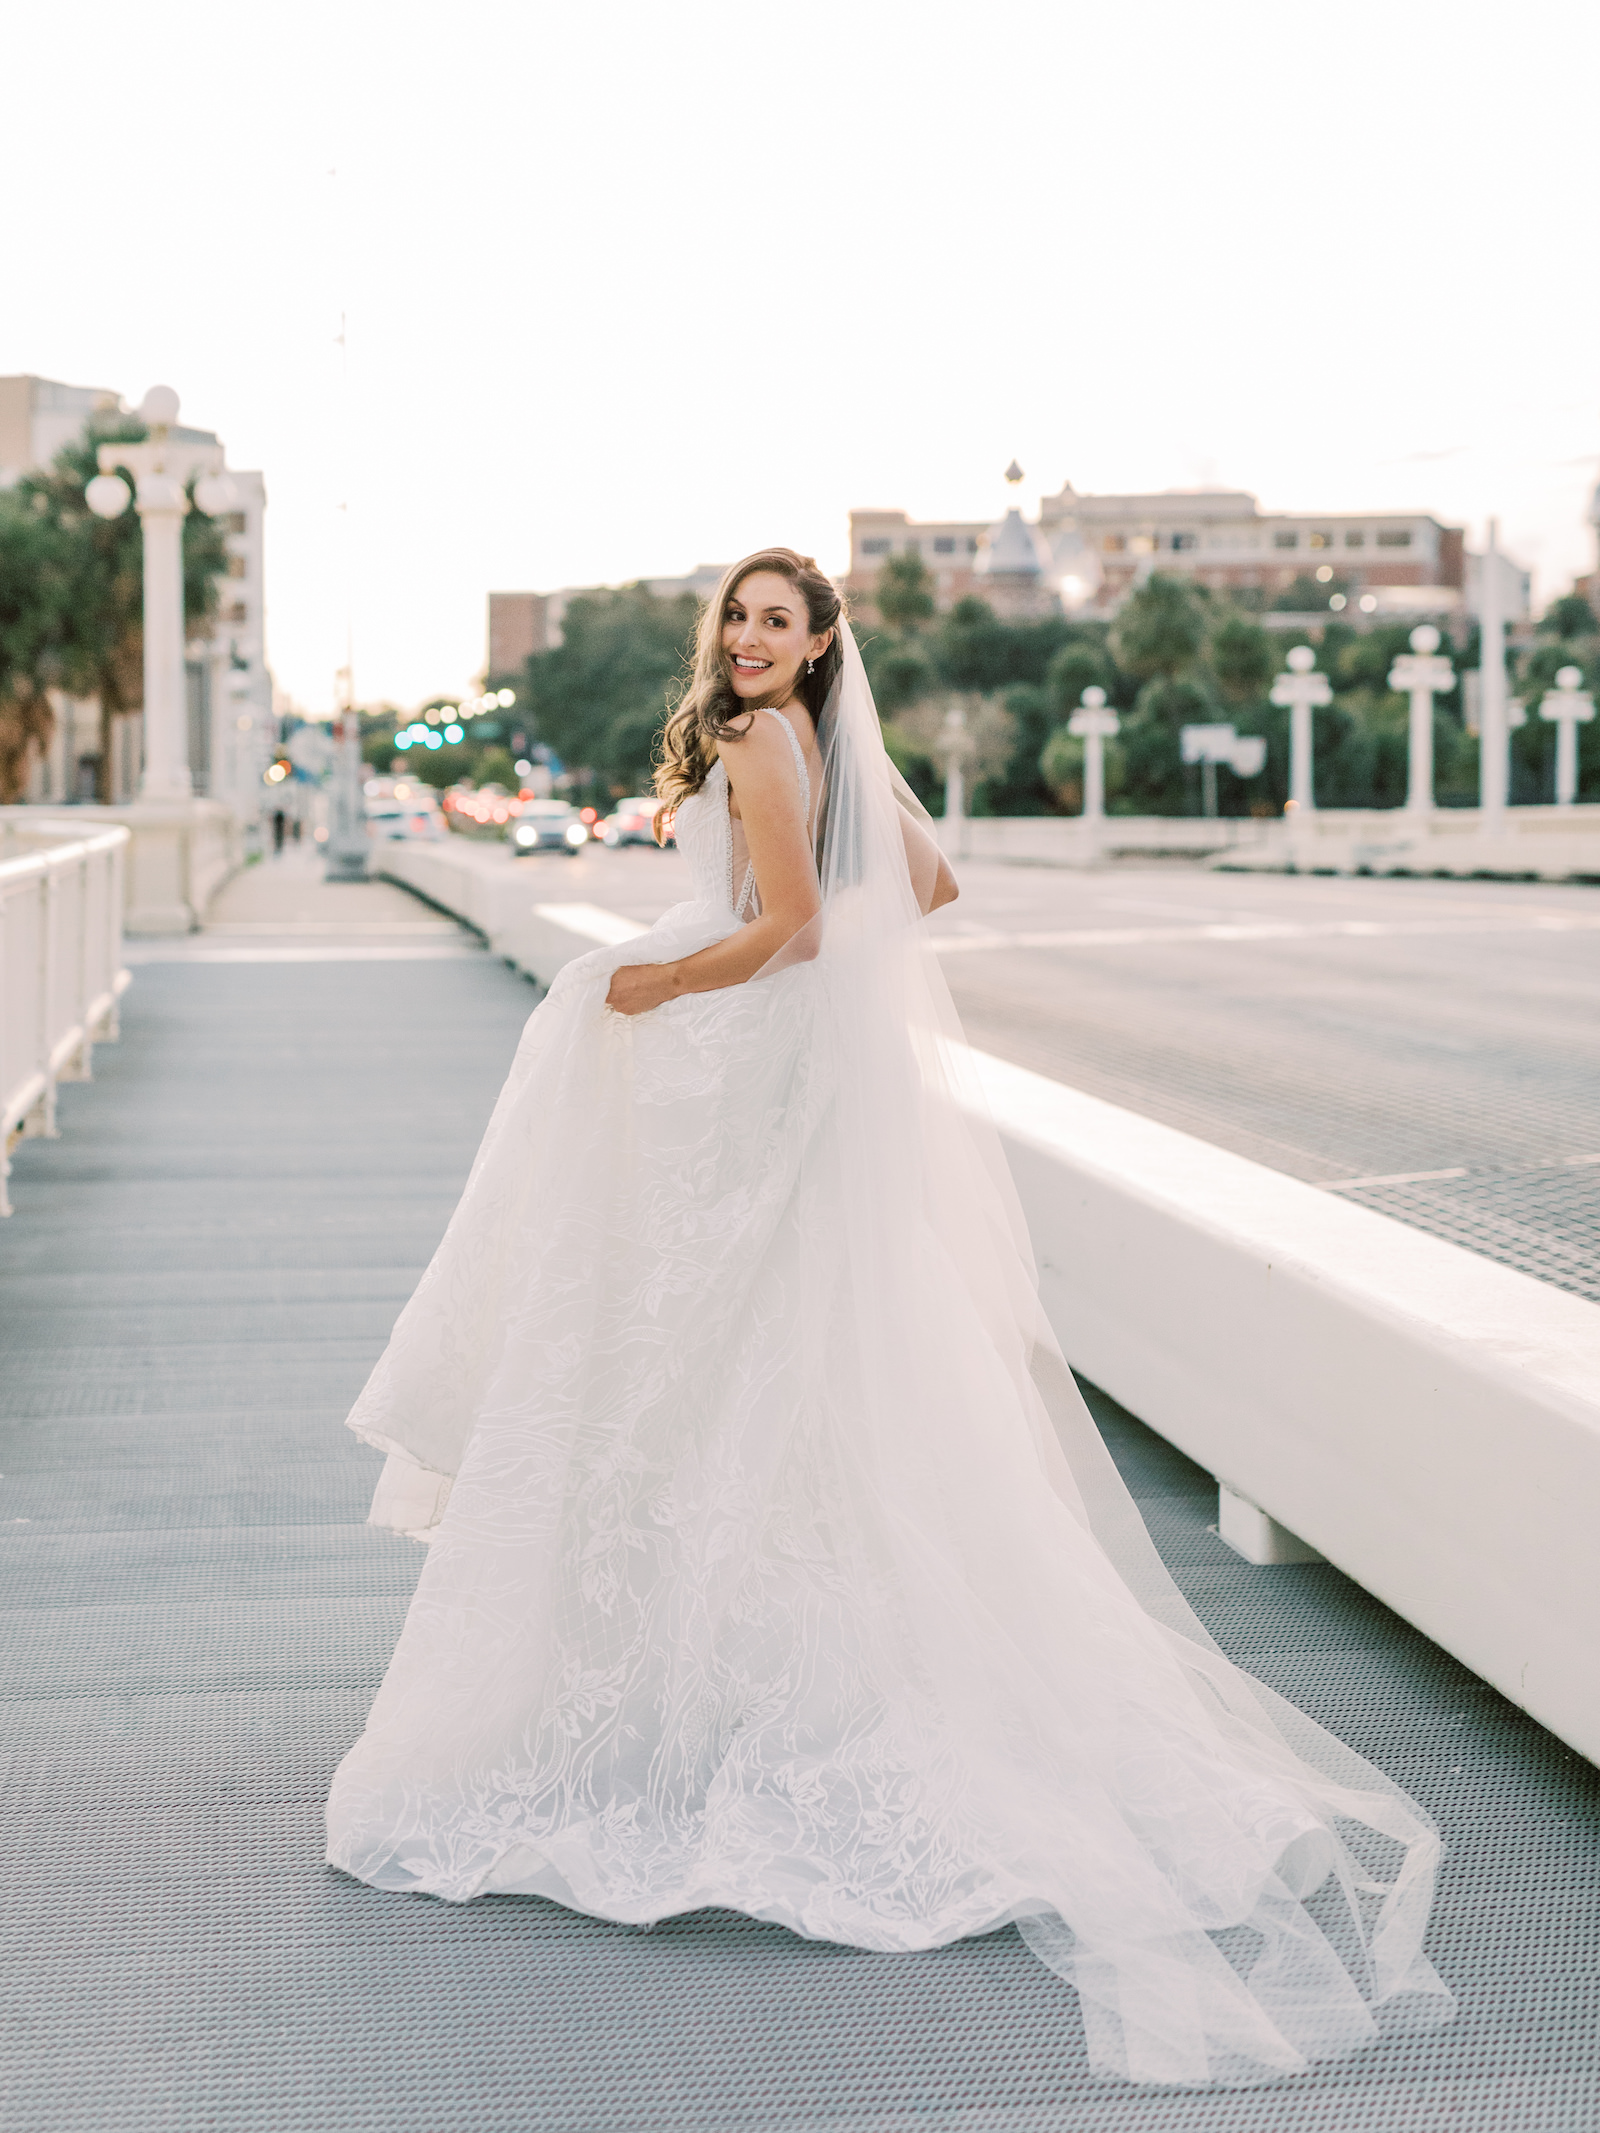 Urban Outdoor Bridal Portrait in Streets of Downtown Tampa | V Back Embroidered Illusion Panel Allure Couture Designer Wedding Dress Bridal Gown with Long Cathedral Veil